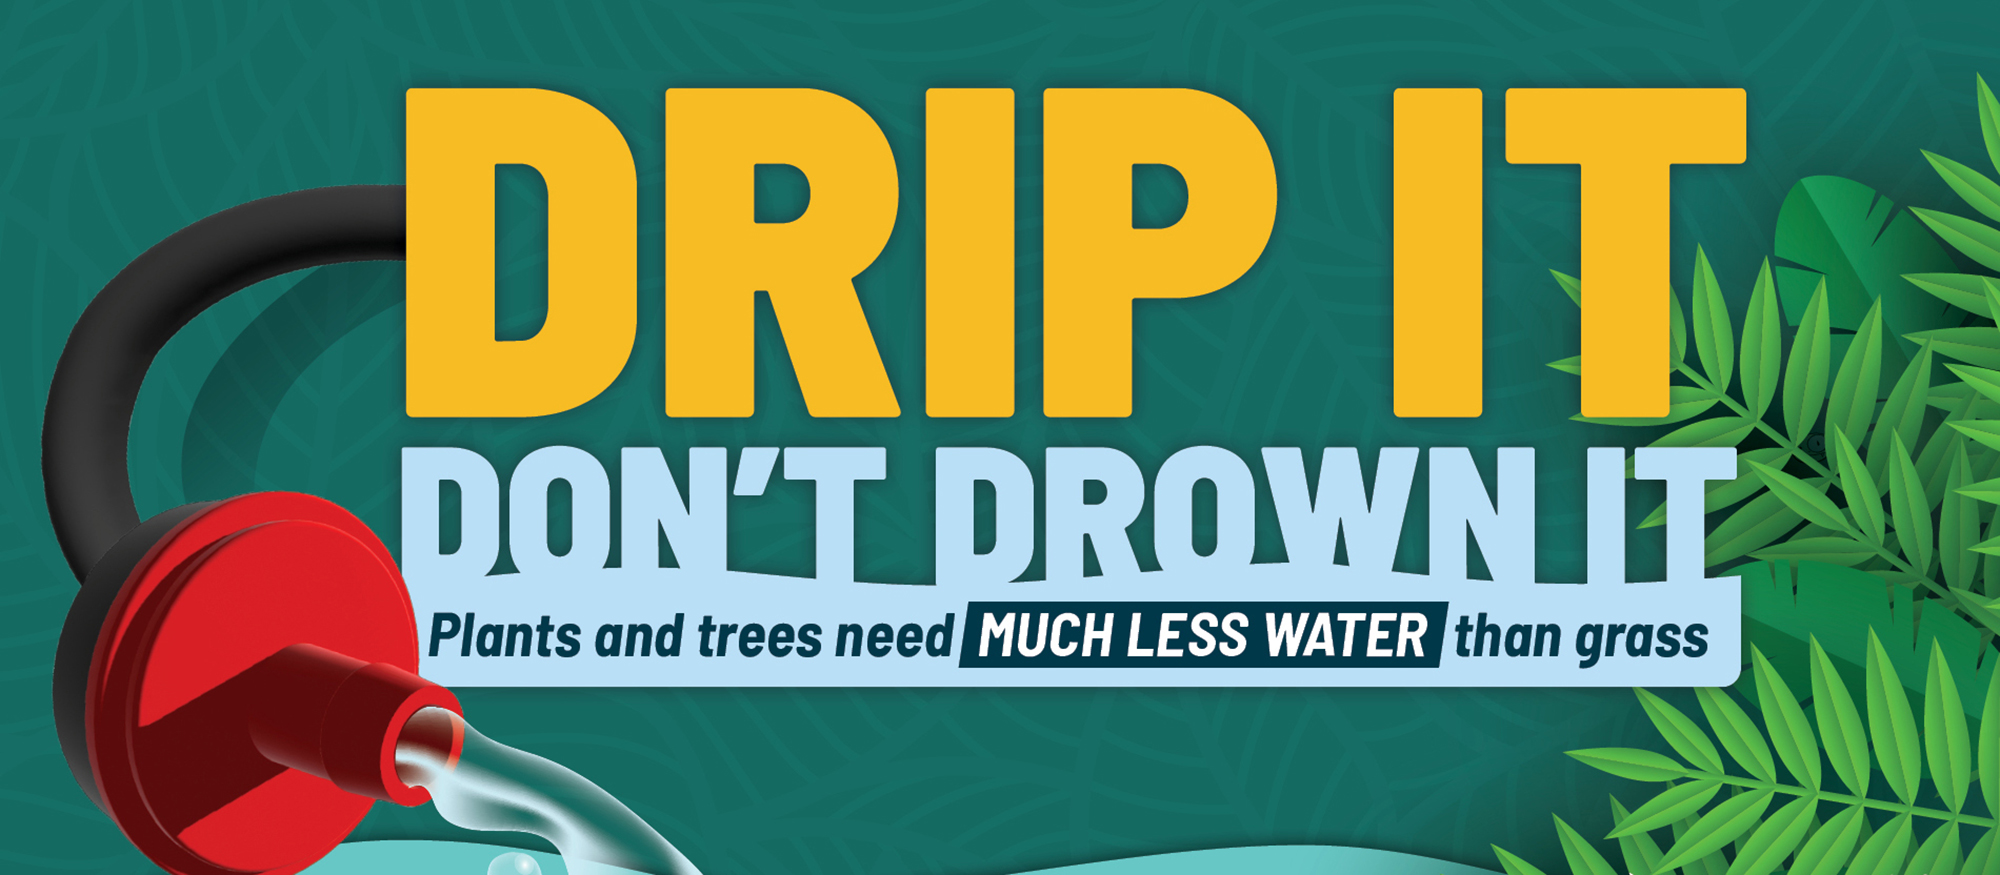 Graphic with drip heads says "drip it don't drown it - plants on drip systems need FAR LESS water than grass on sprinklers"